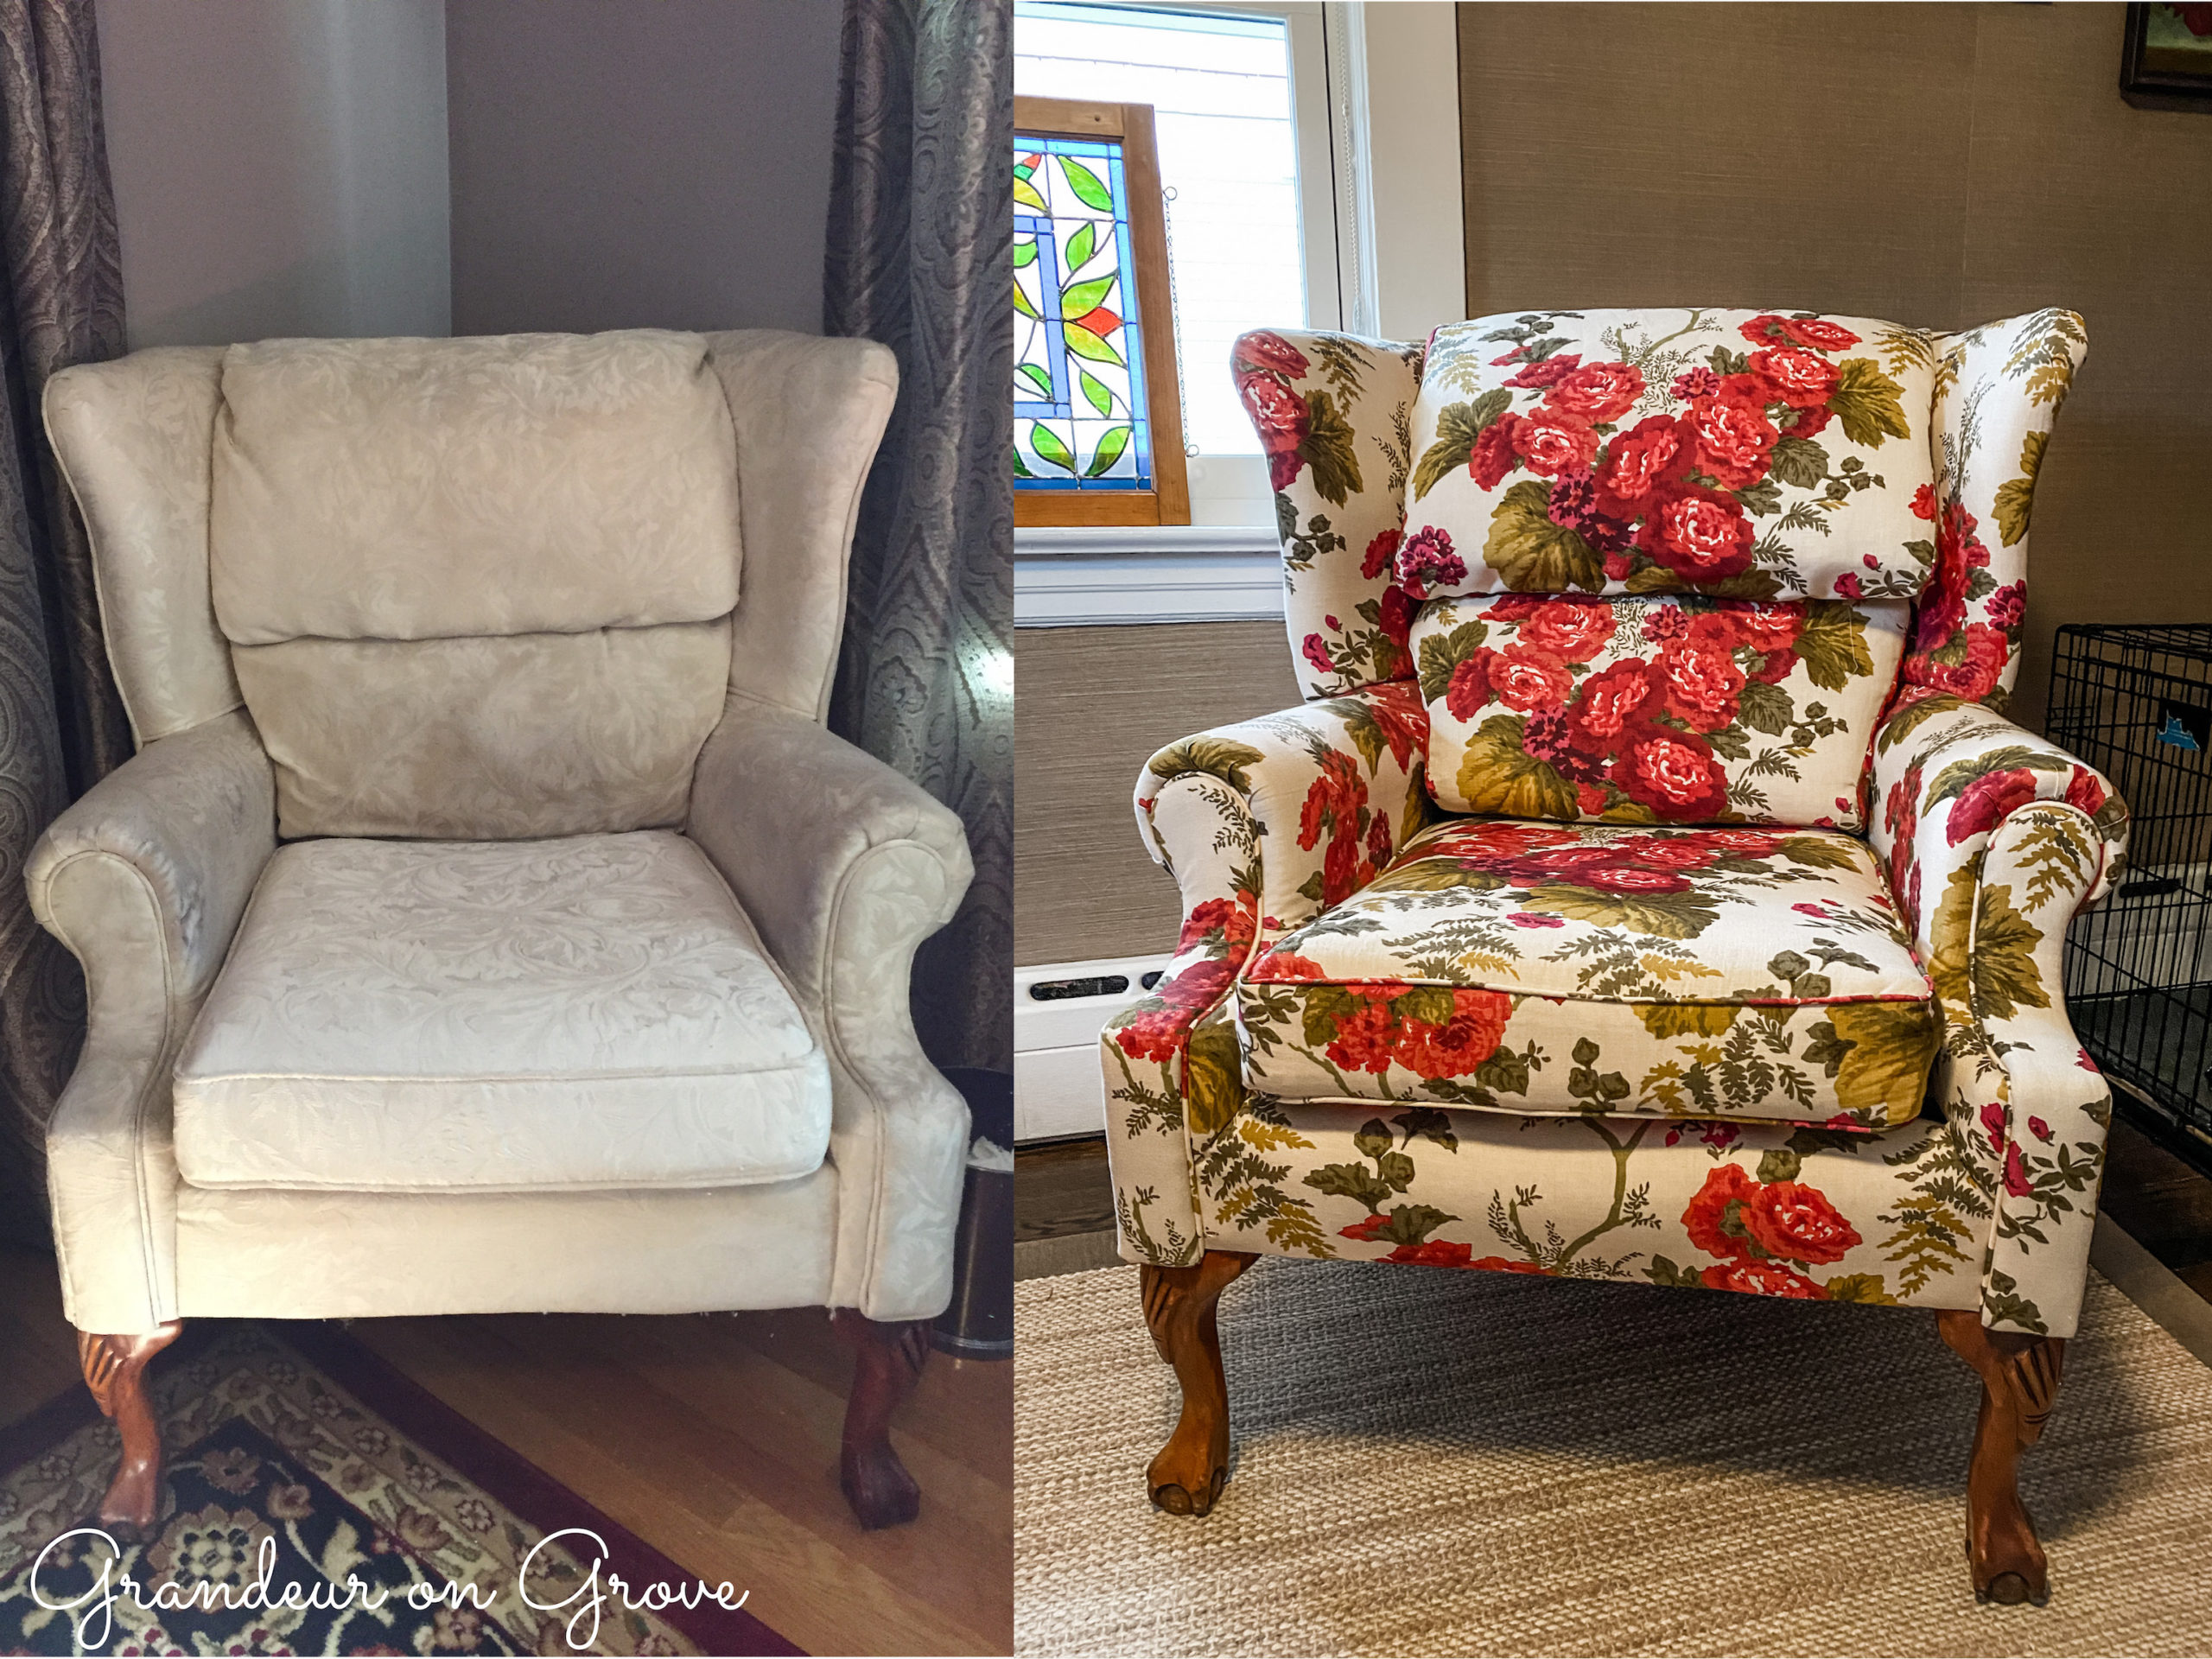 How to Paint Fabric Furniture - This Old House